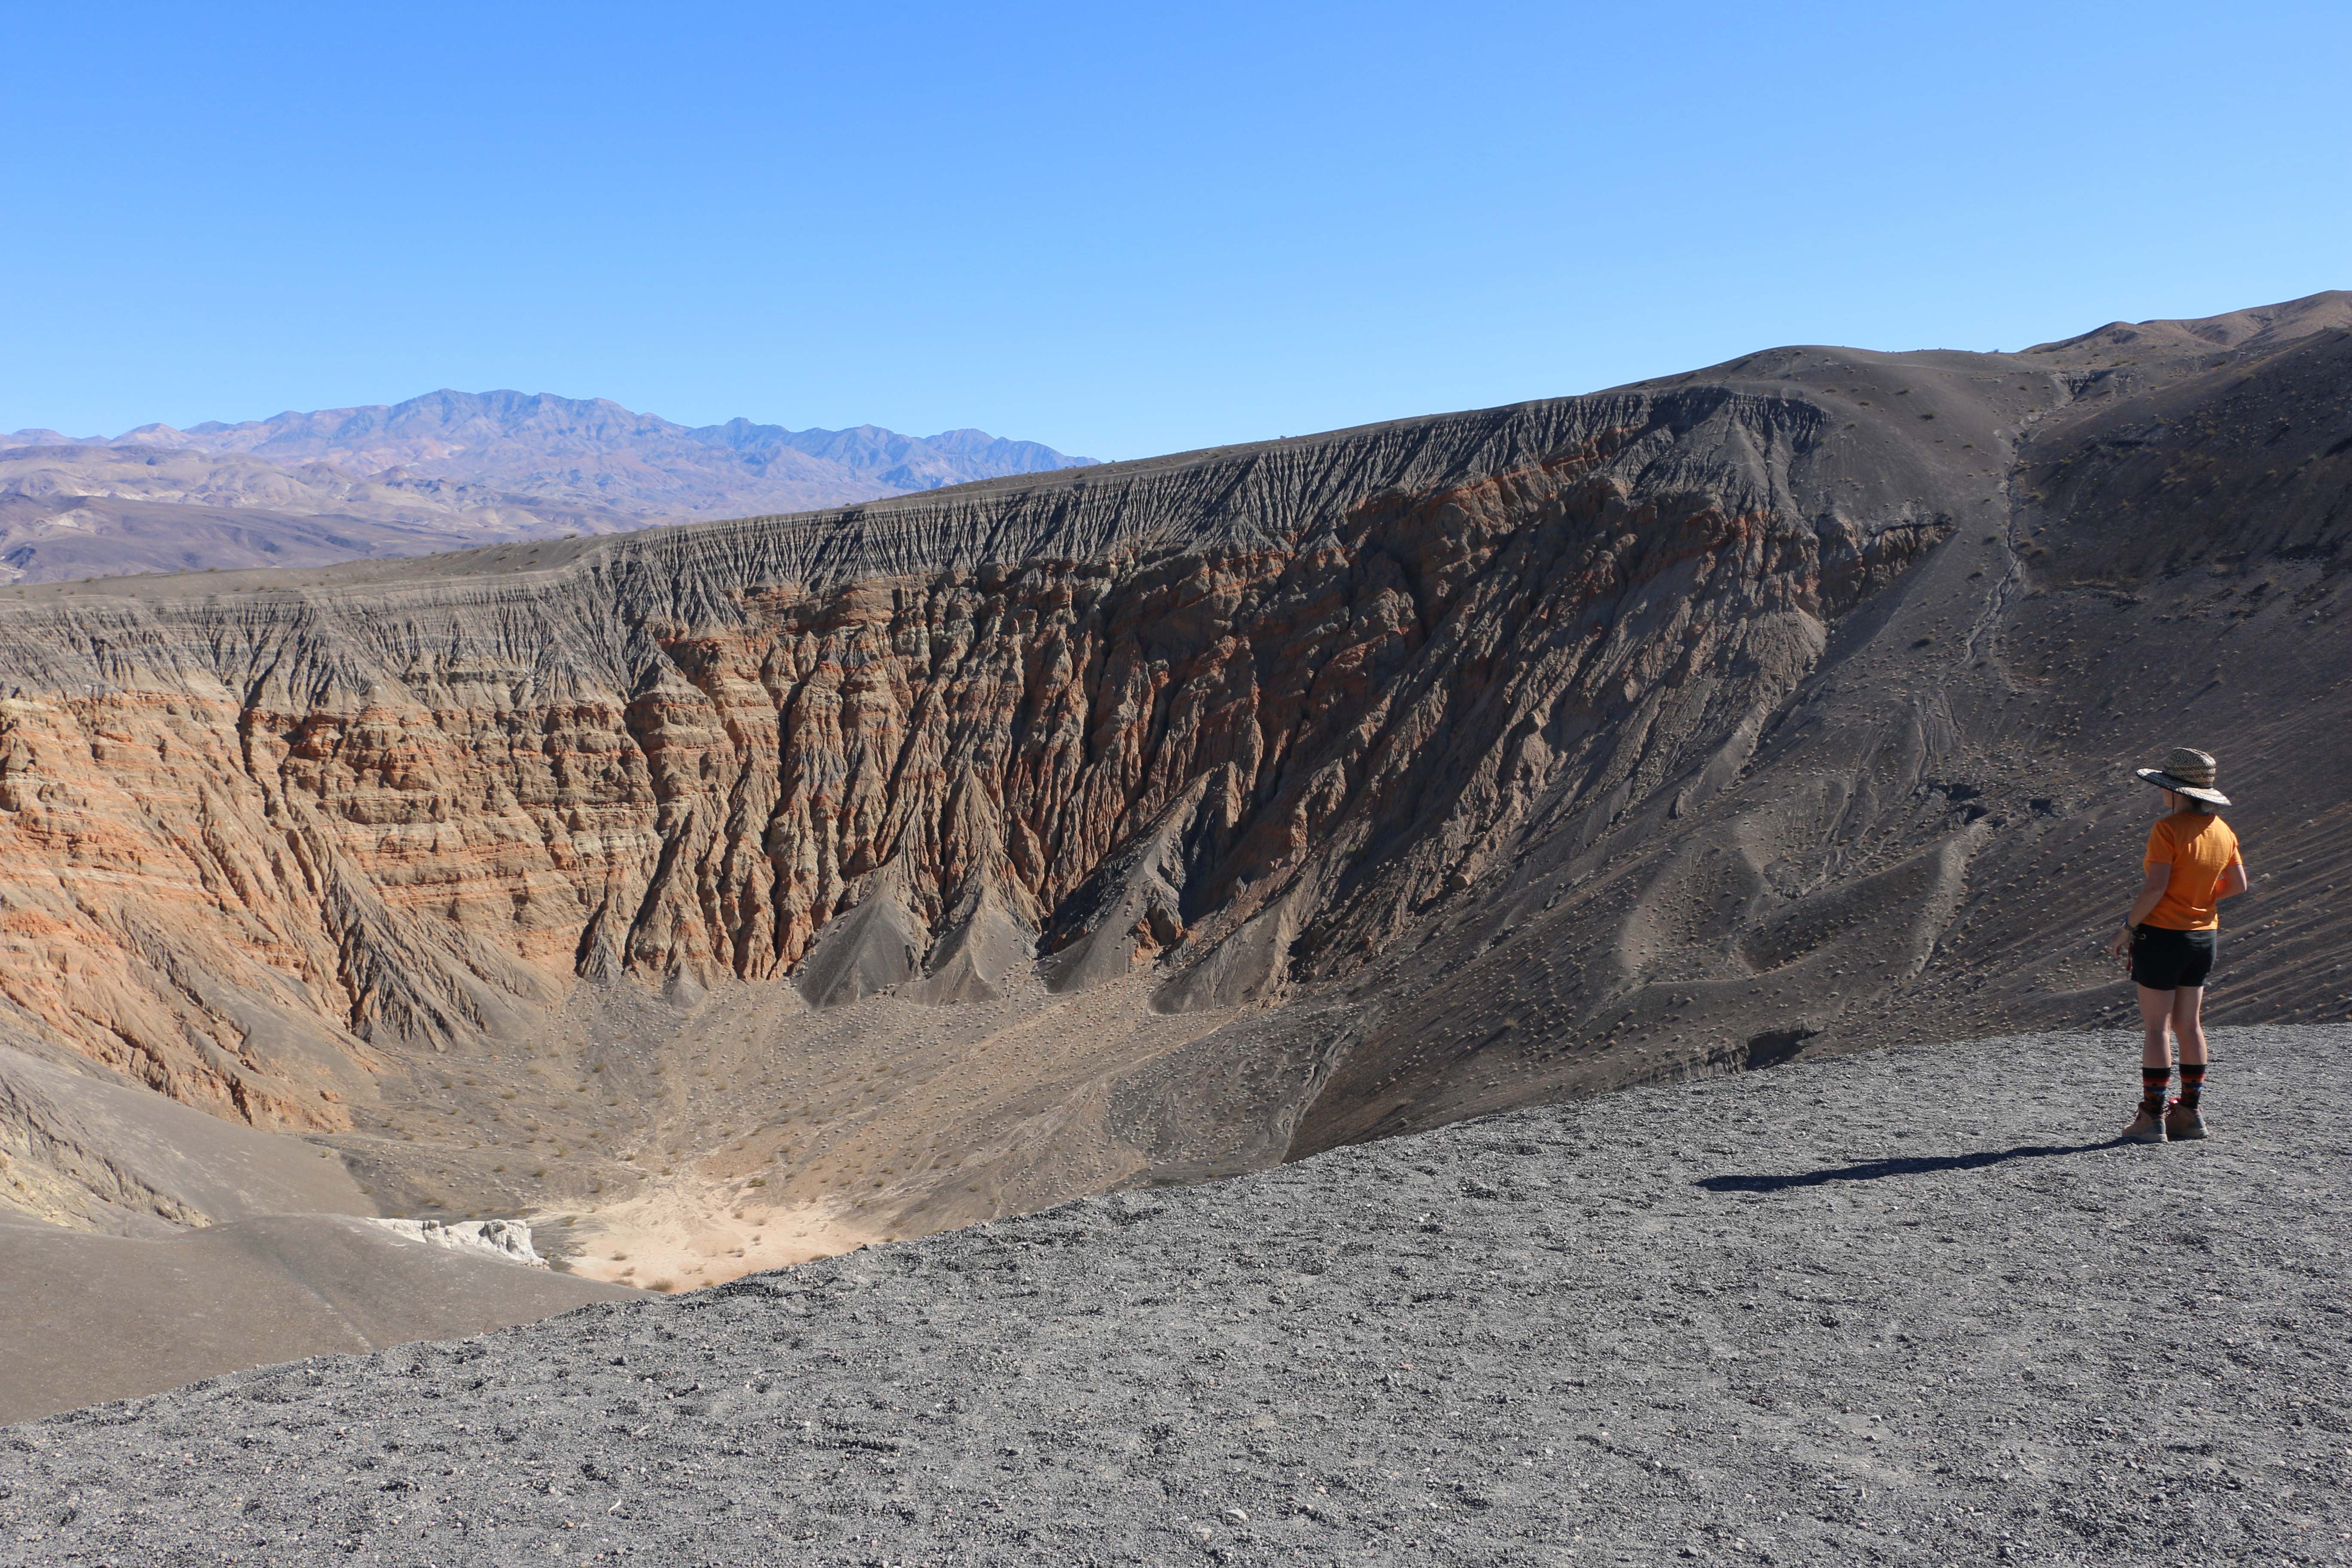 A person wearing an orange shirt and black shorts stands on the right of the photo, looking into a massive crater with gray, orange, and white eroded steep walls.